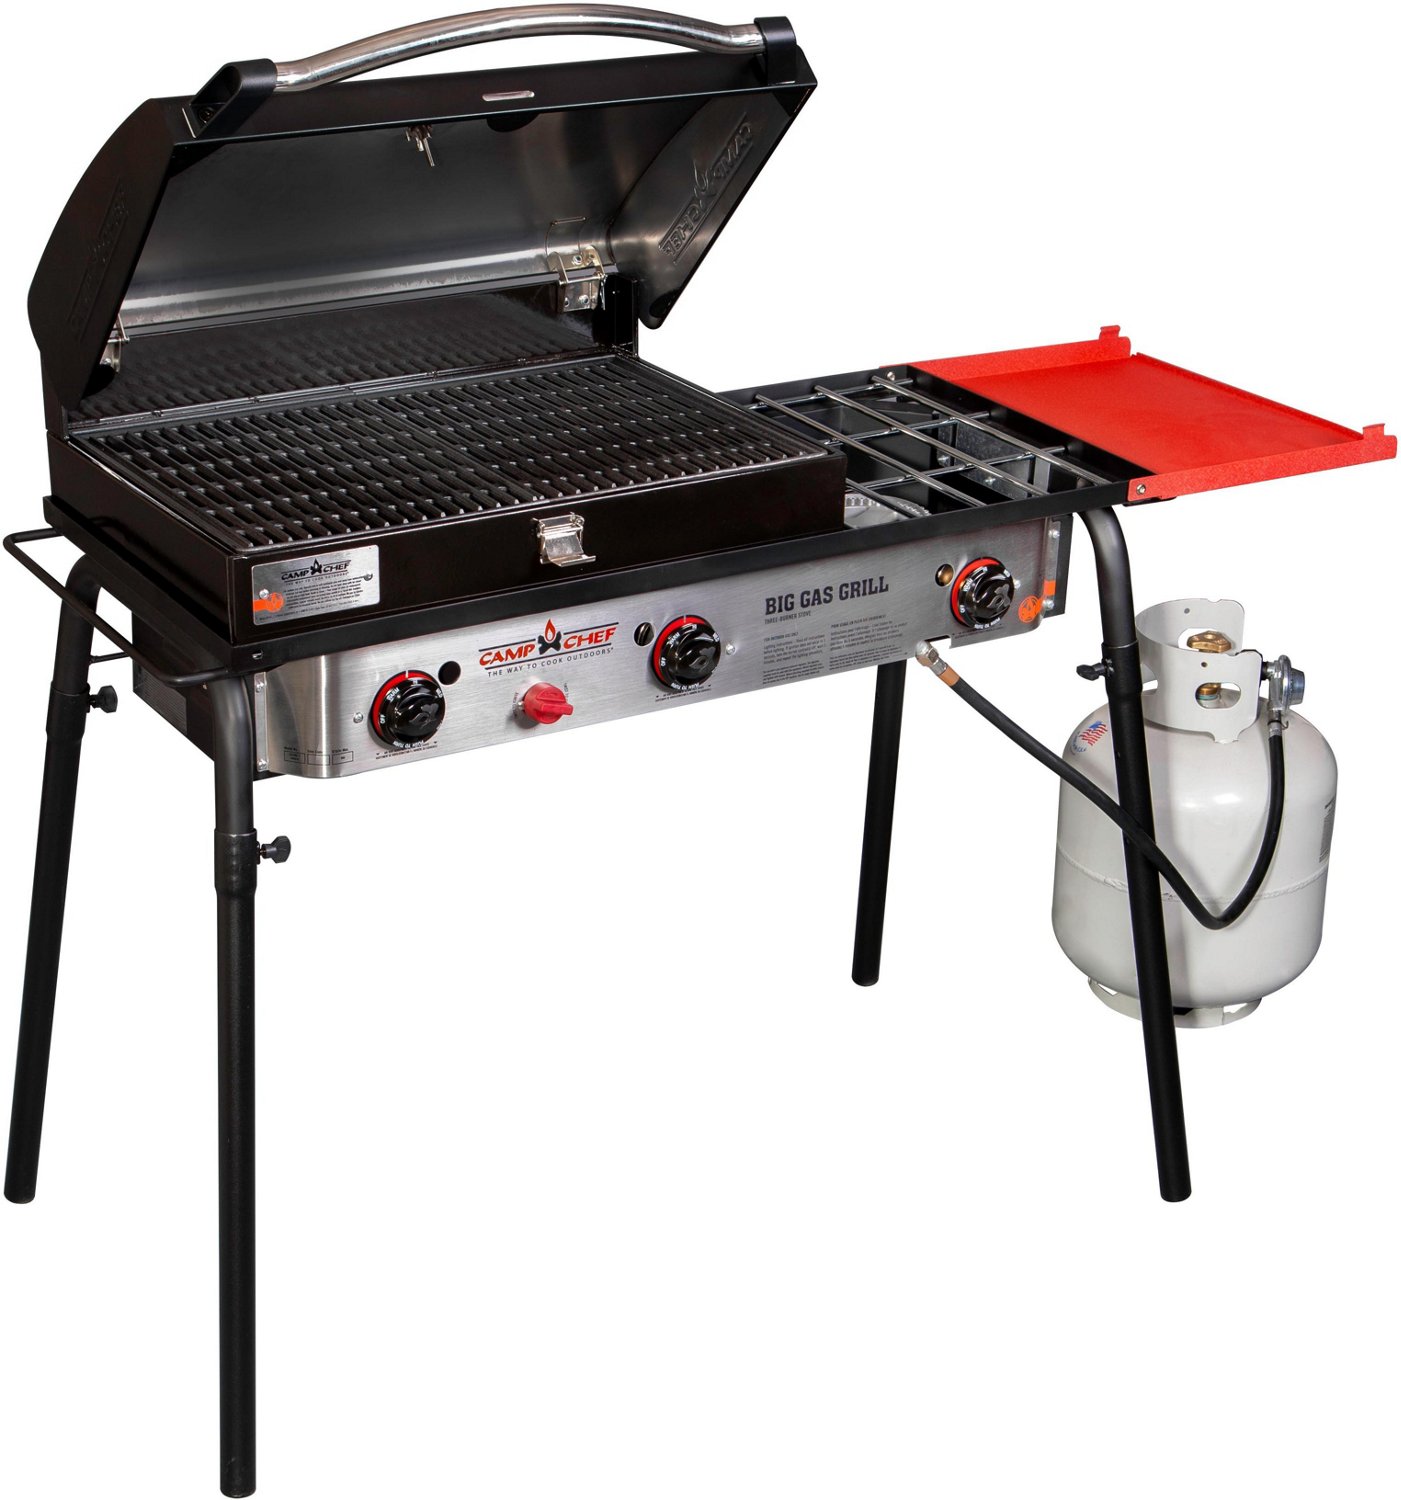 Camp Chef 14 x 16 Professional Flat Top Griddle - St. Louis BBQ